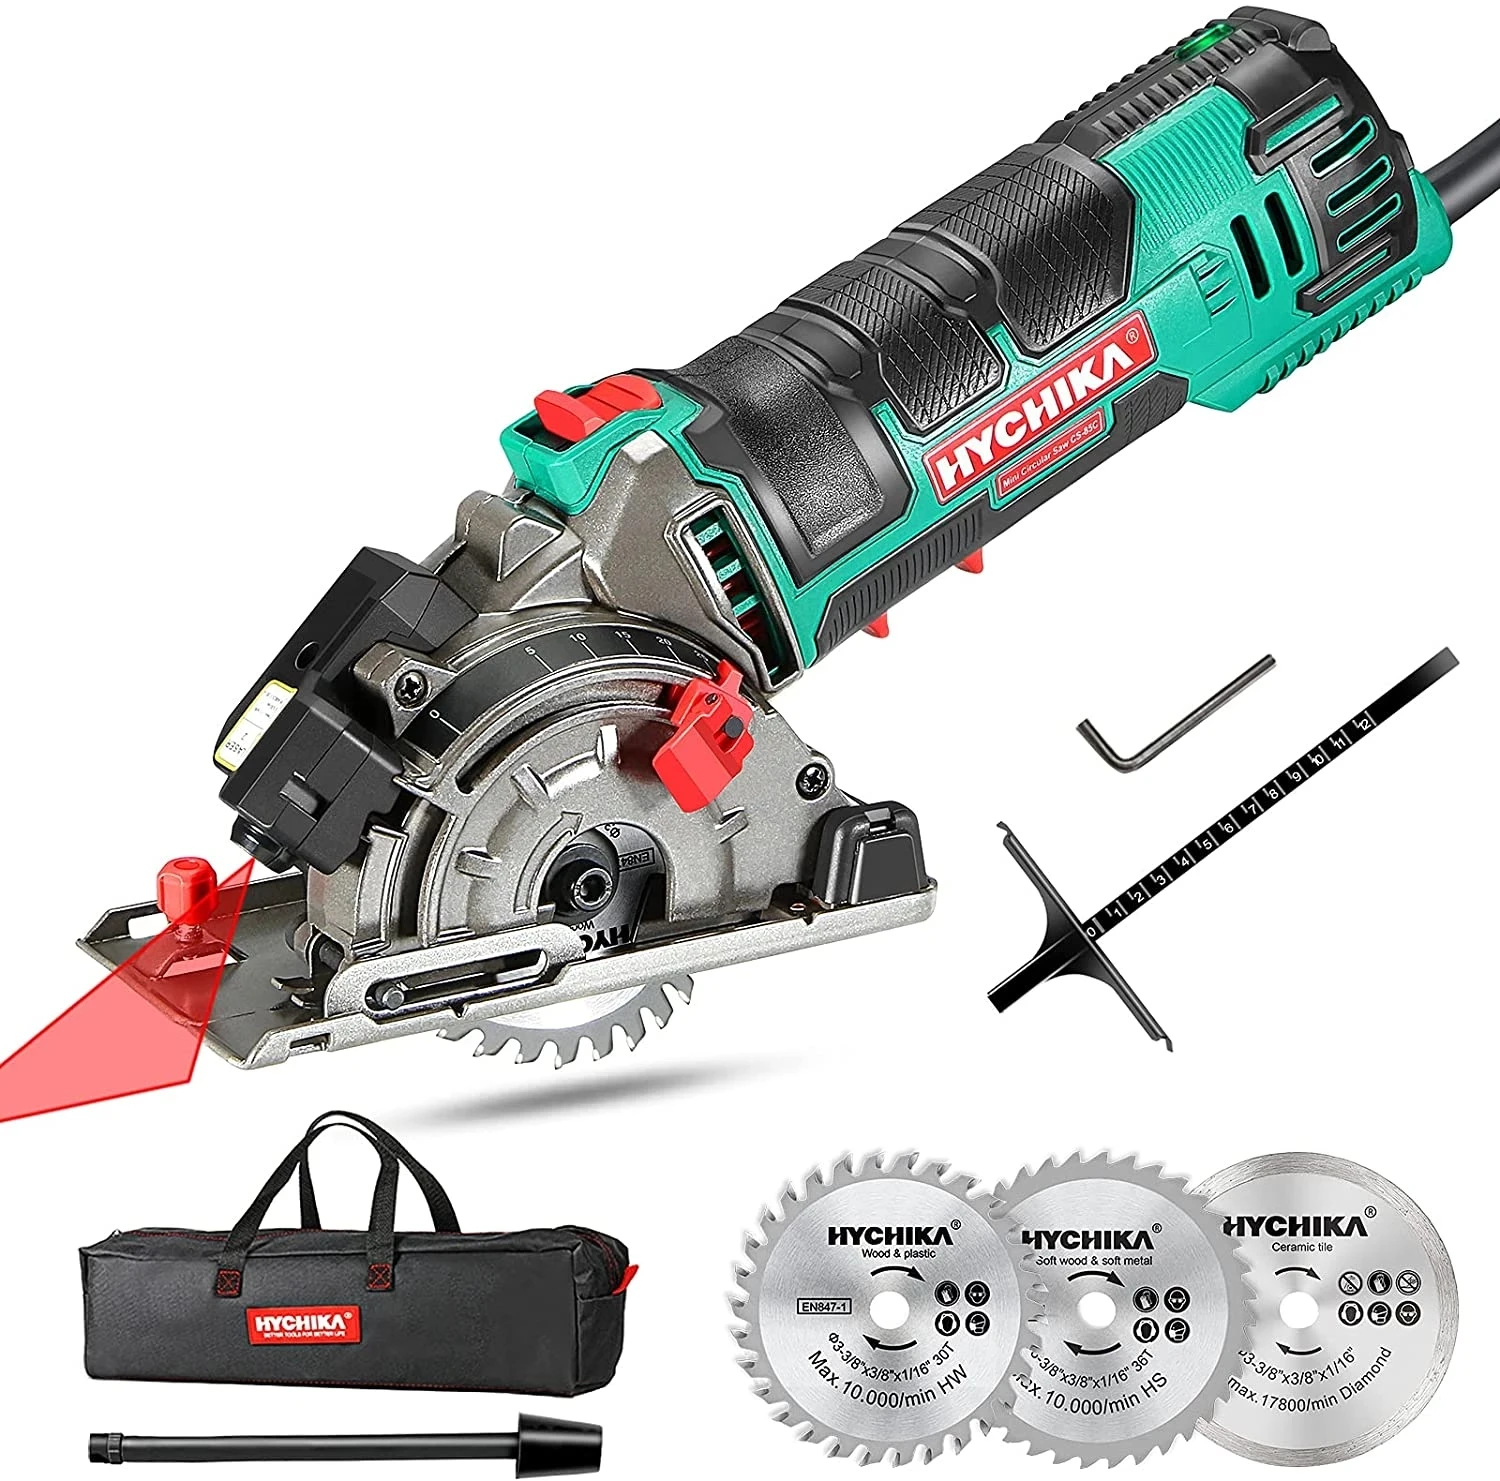 

New low price Compact Circular Saw, HYCHIKA Mini Cirucular Saw with 3 Saw Blades, Laser Guide, Scale Ruler, Metal wall plate